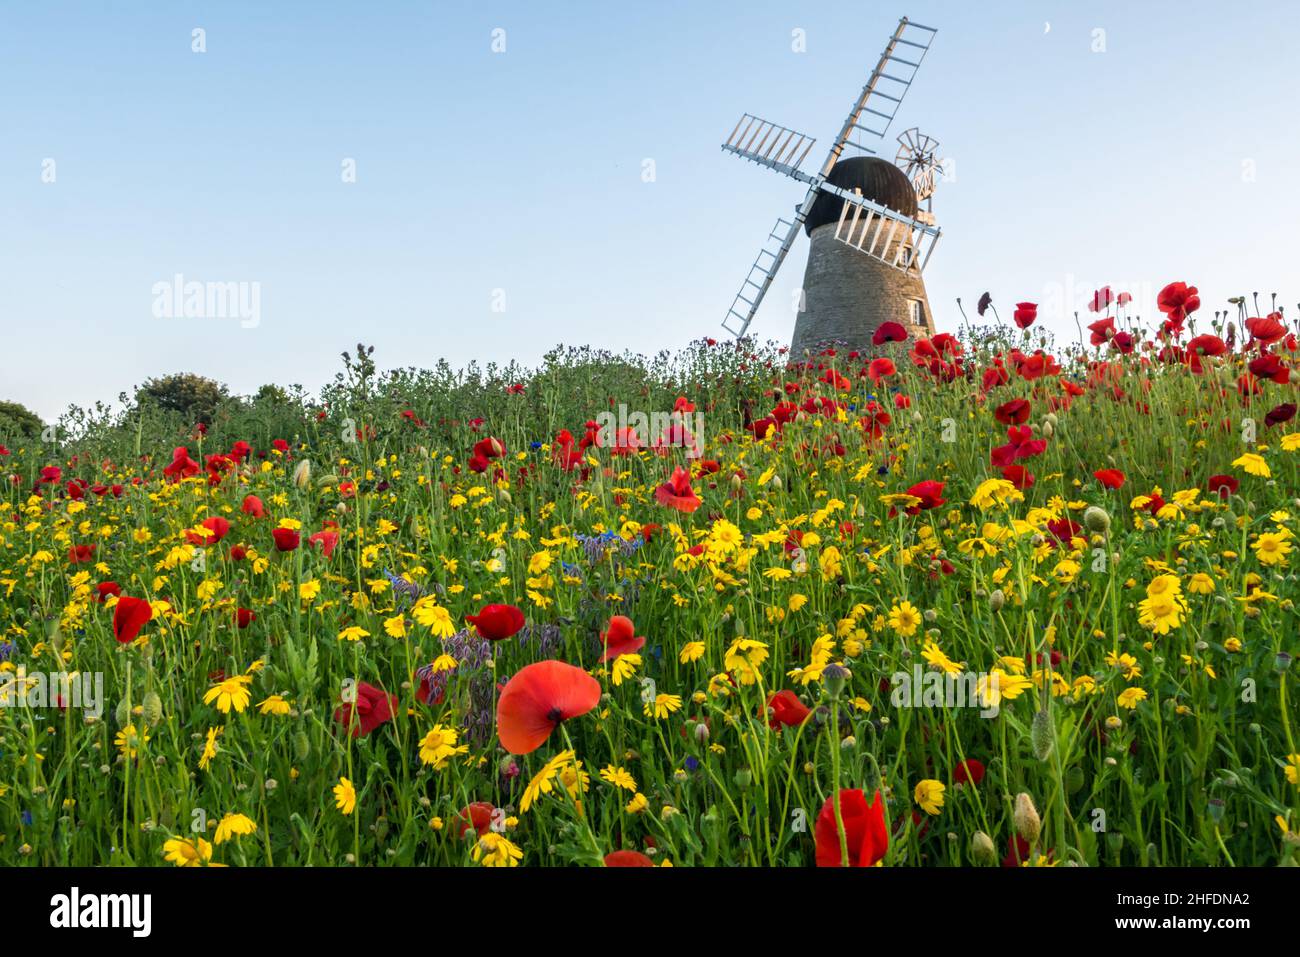 Landscape of Wildflowers growing at Whitburn Windmill in Summertime Stock Photo